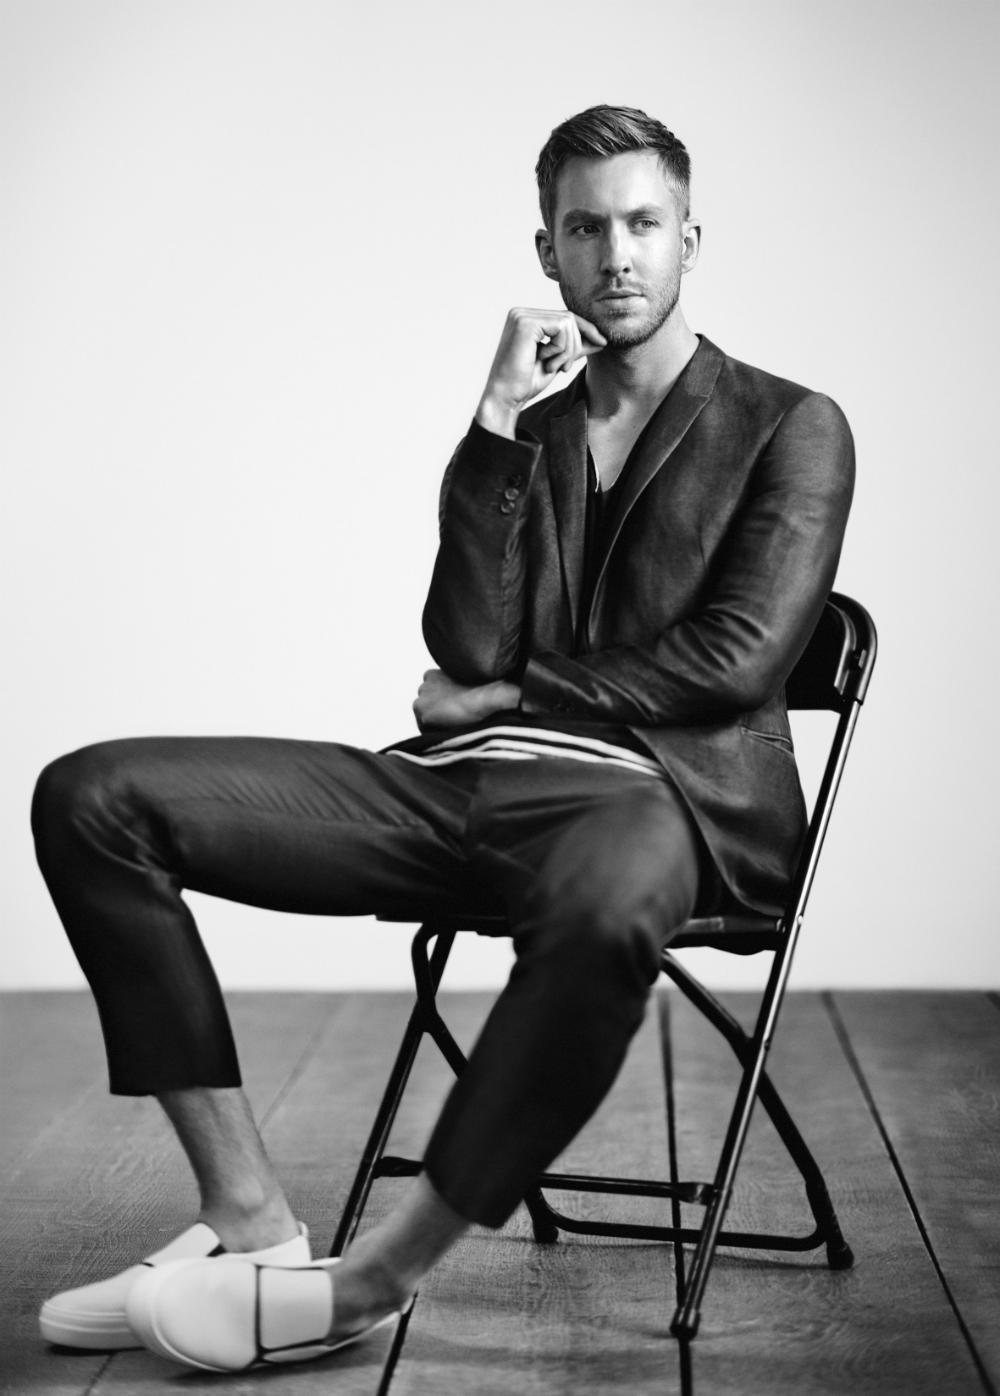 Guess Who The New Face of Emporio Armani is? Calvin Harris